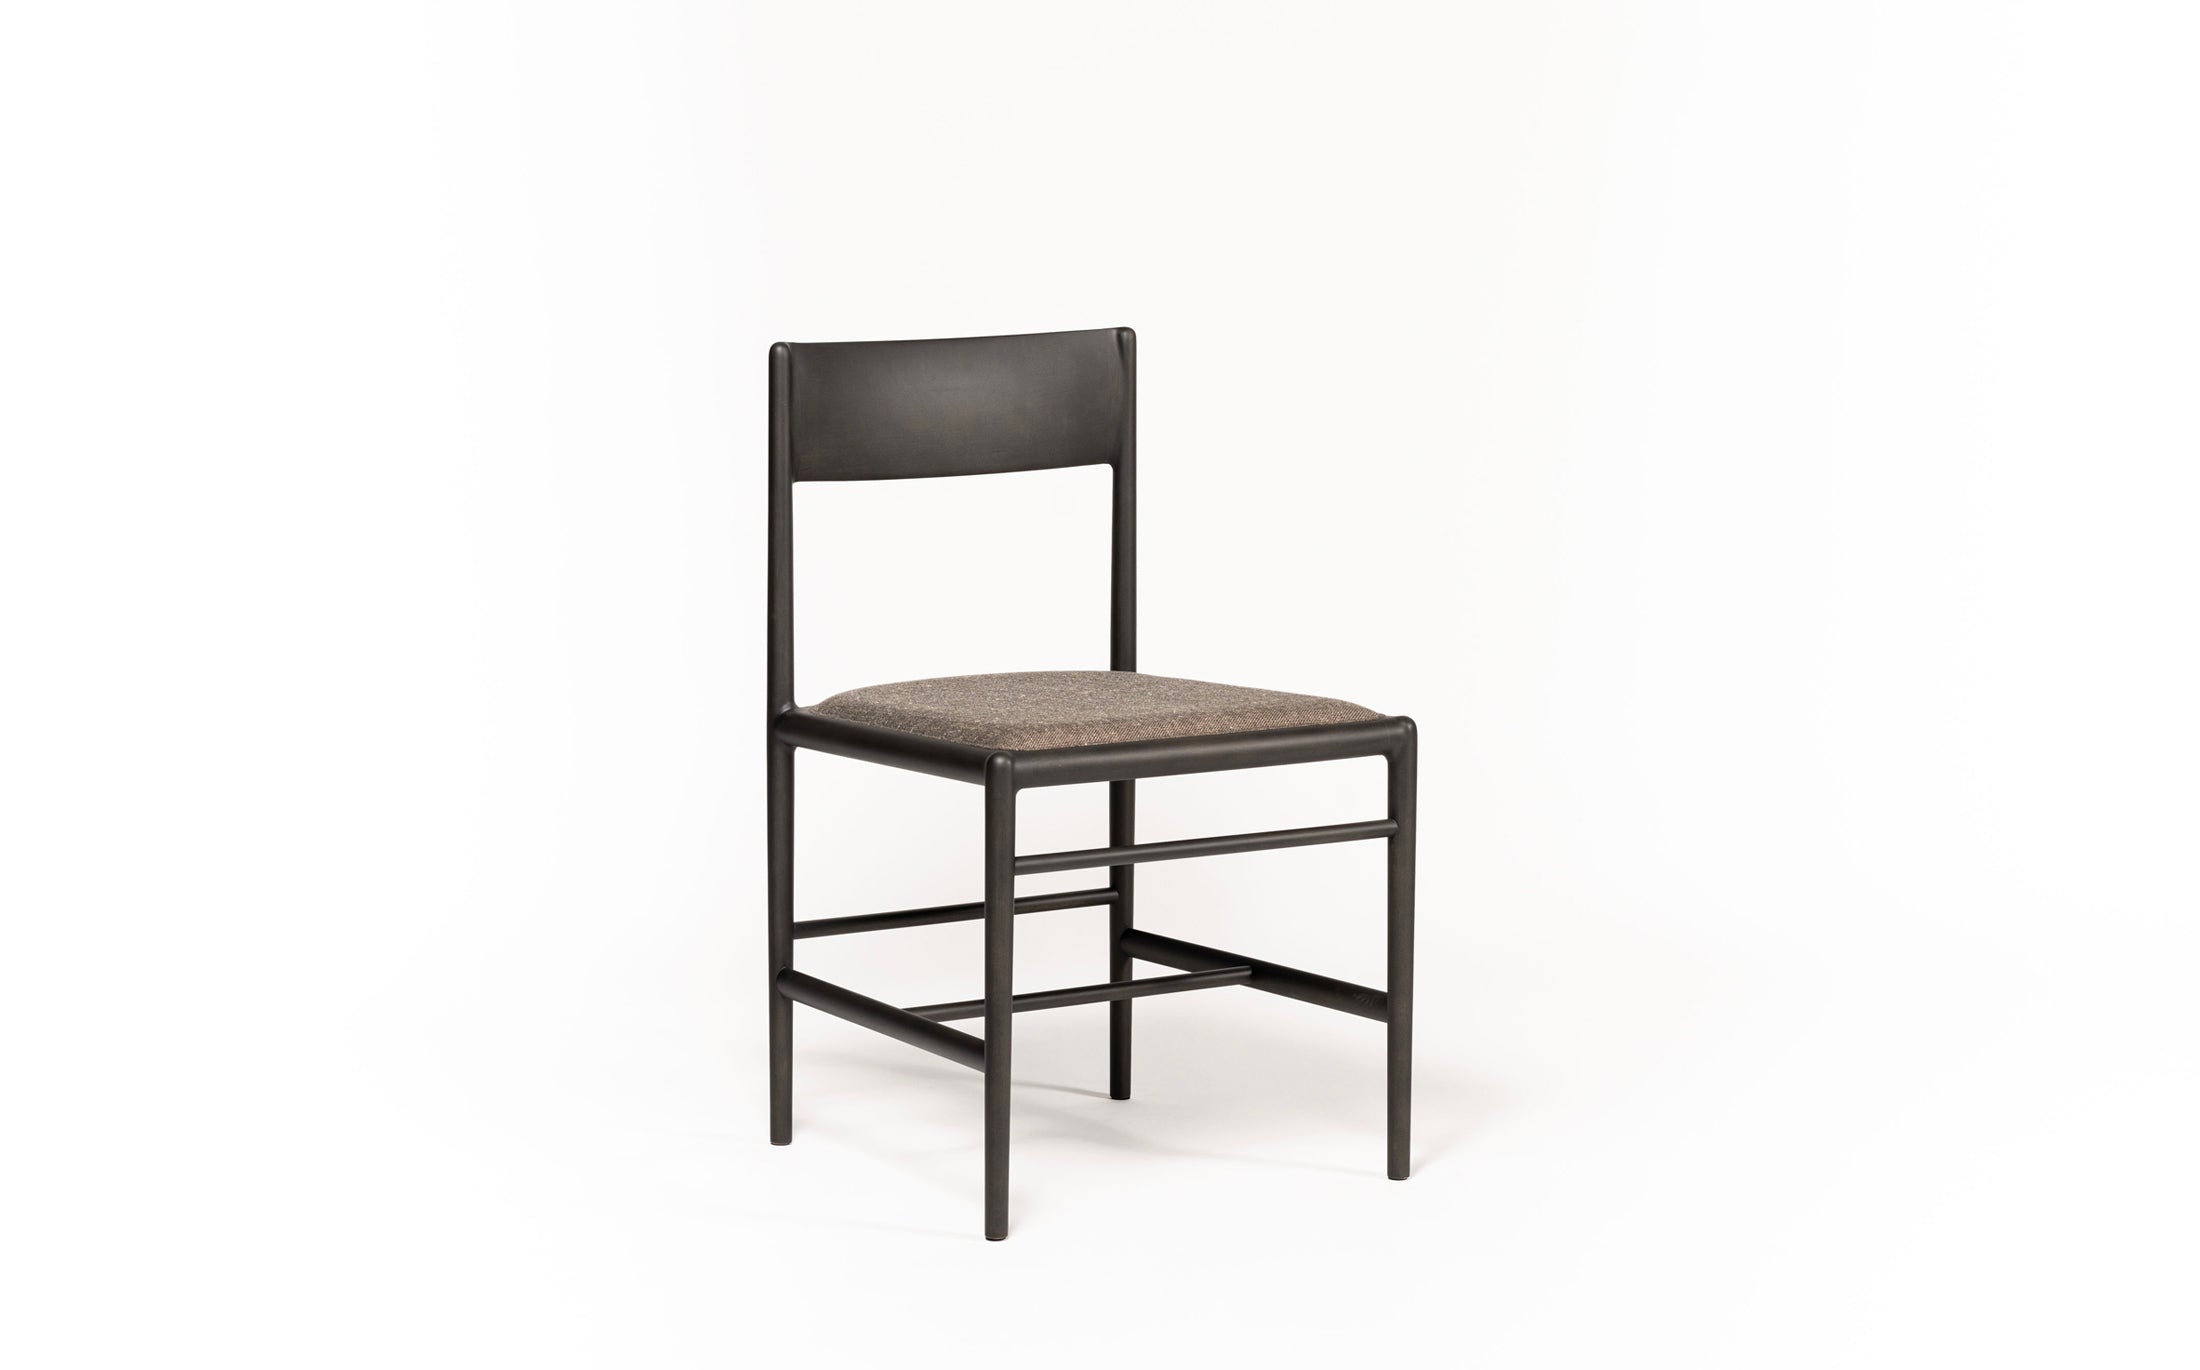 a chair on the vertical axis - sidechair - I-711-display5